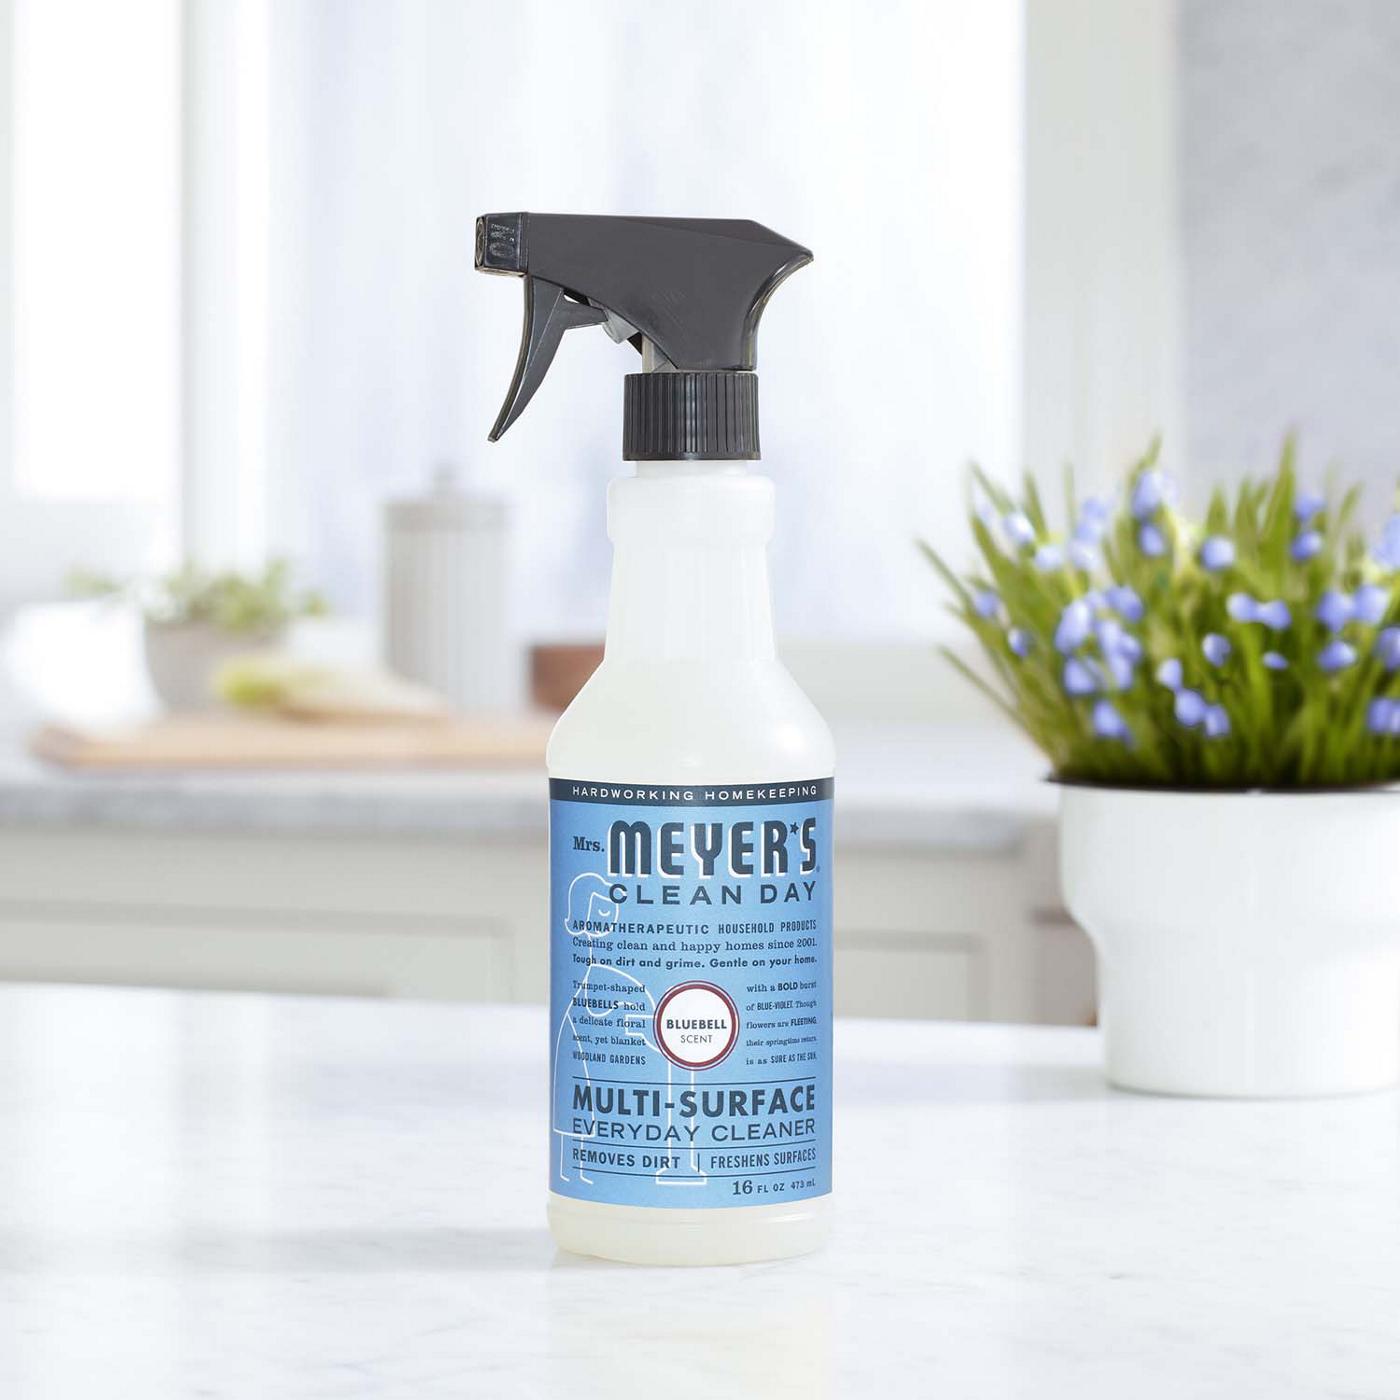 Mrs. Meyer's Clean Day Bluebell Scent Multi-Surface Everyday Cleaner Spray; image 6 of 6